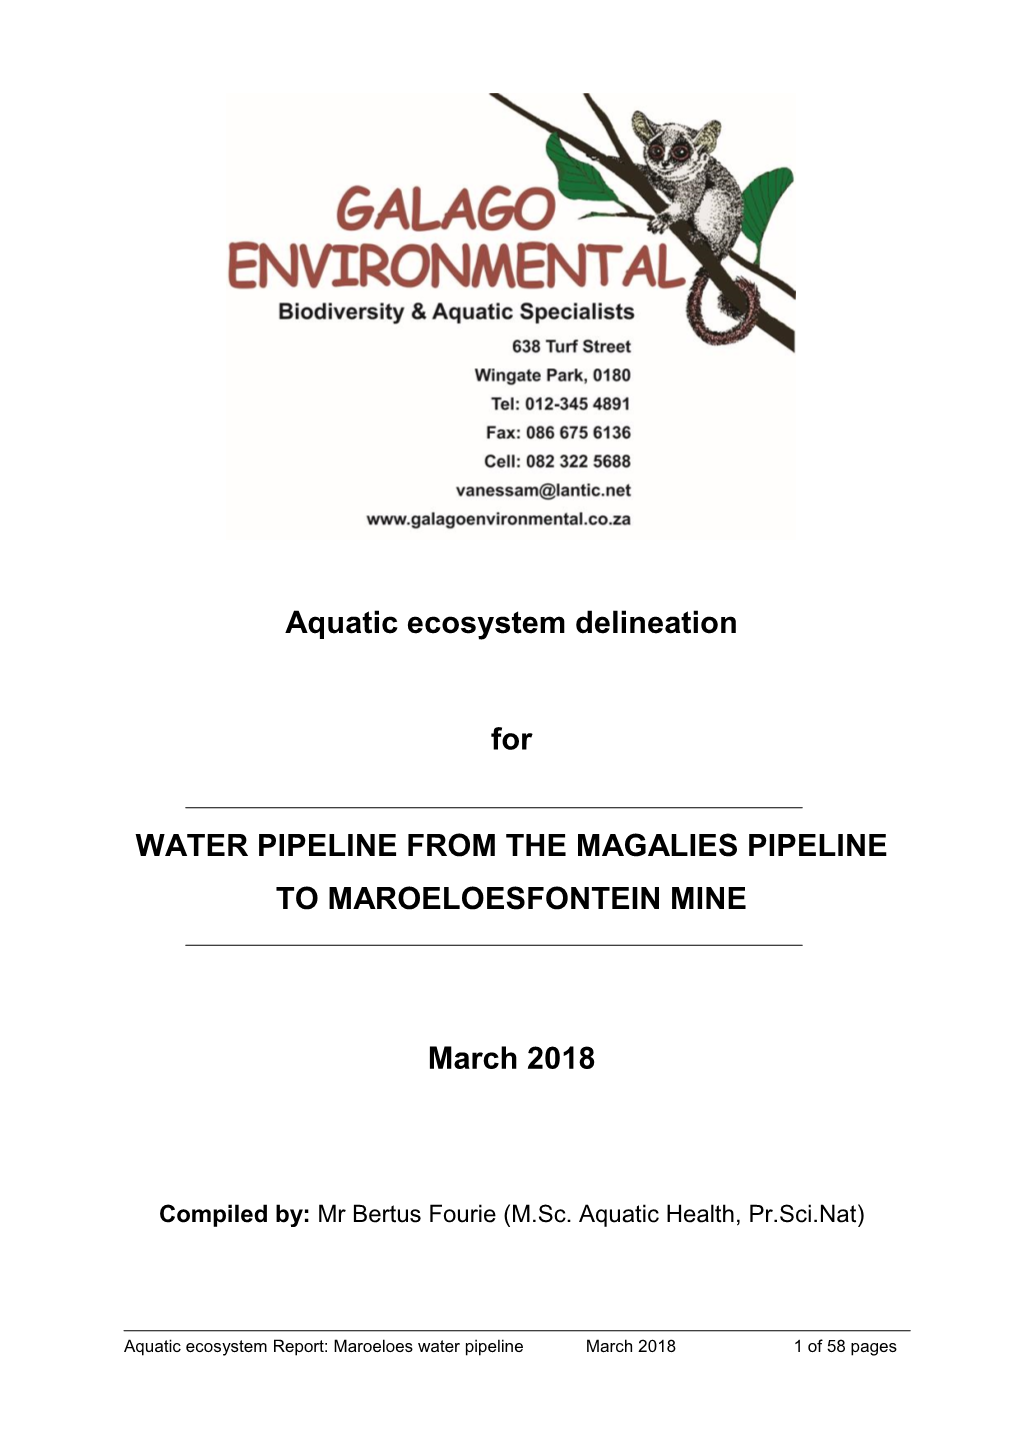 Aquatic Ecosystem Delineation for WATER PIPELINE from THE